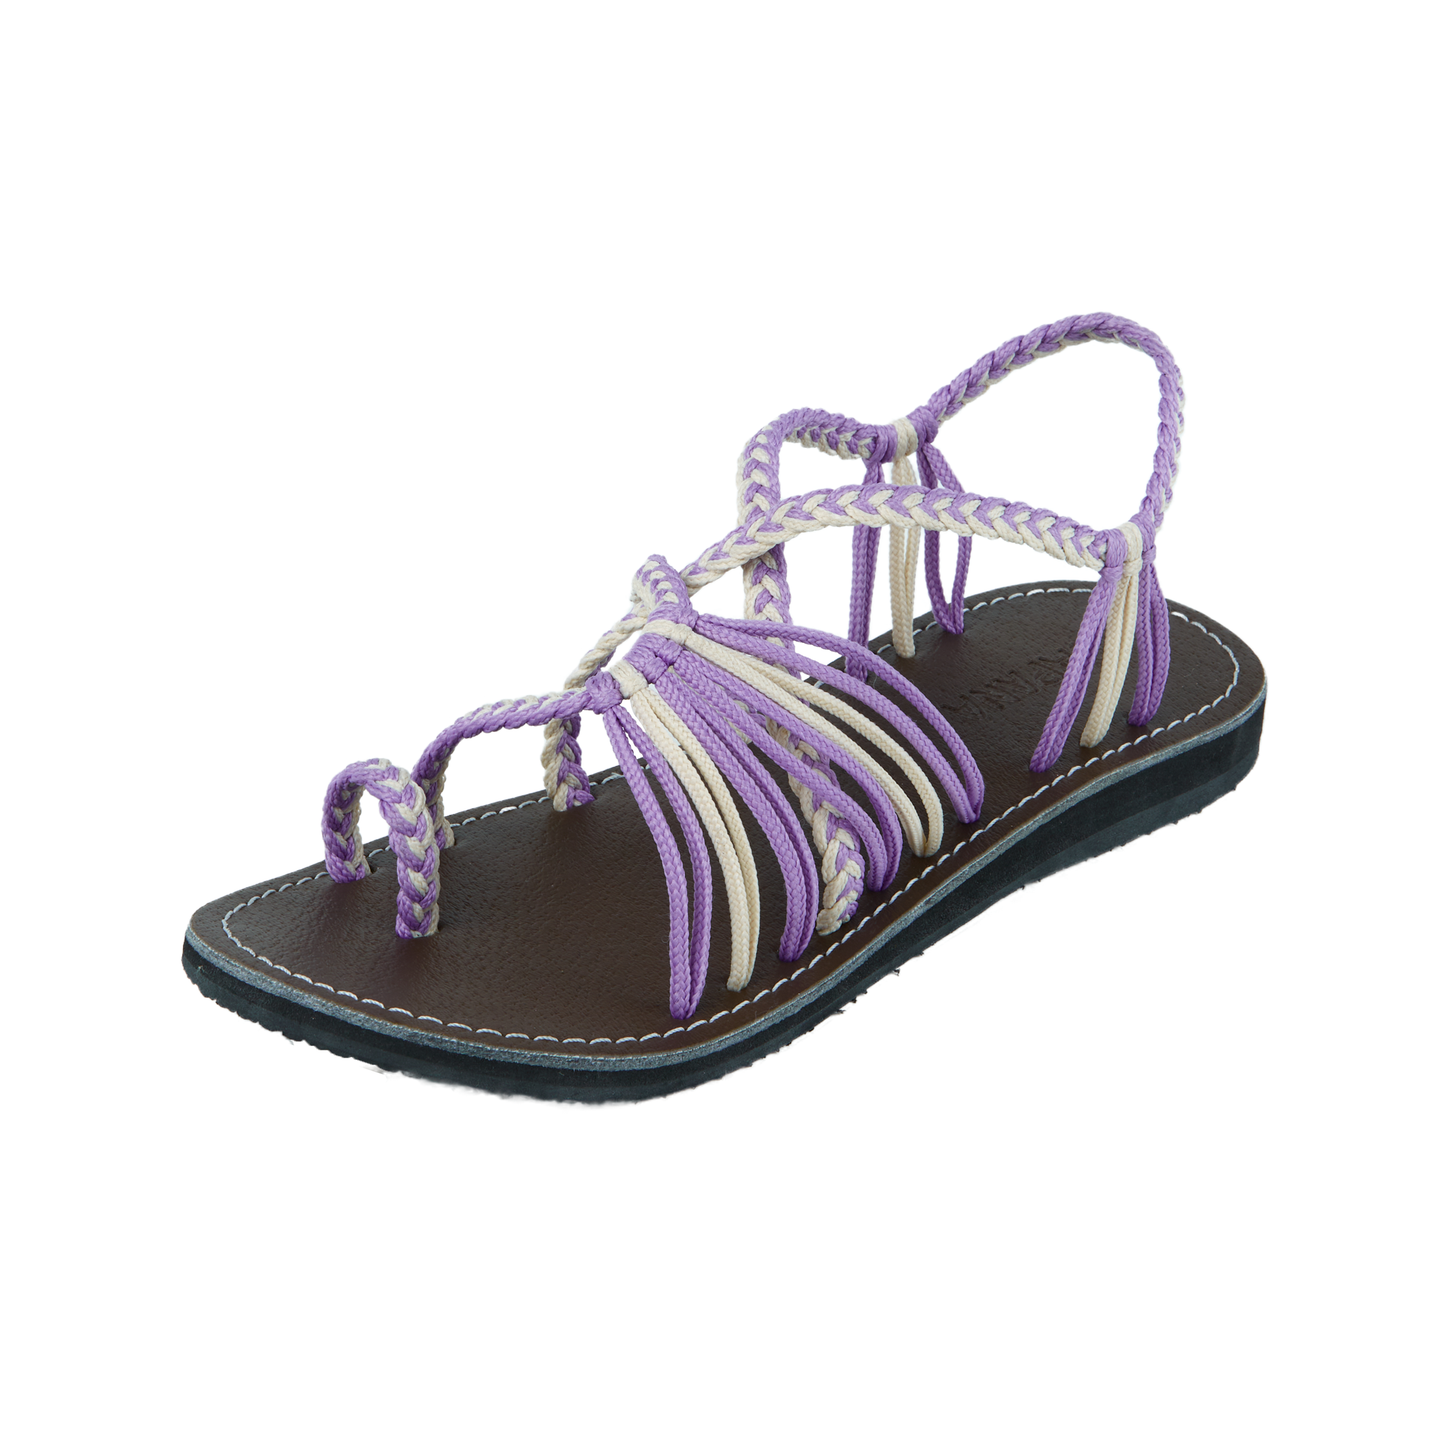 Hand woven sandals Taro Lavender Rope Sandals on the side  in white background